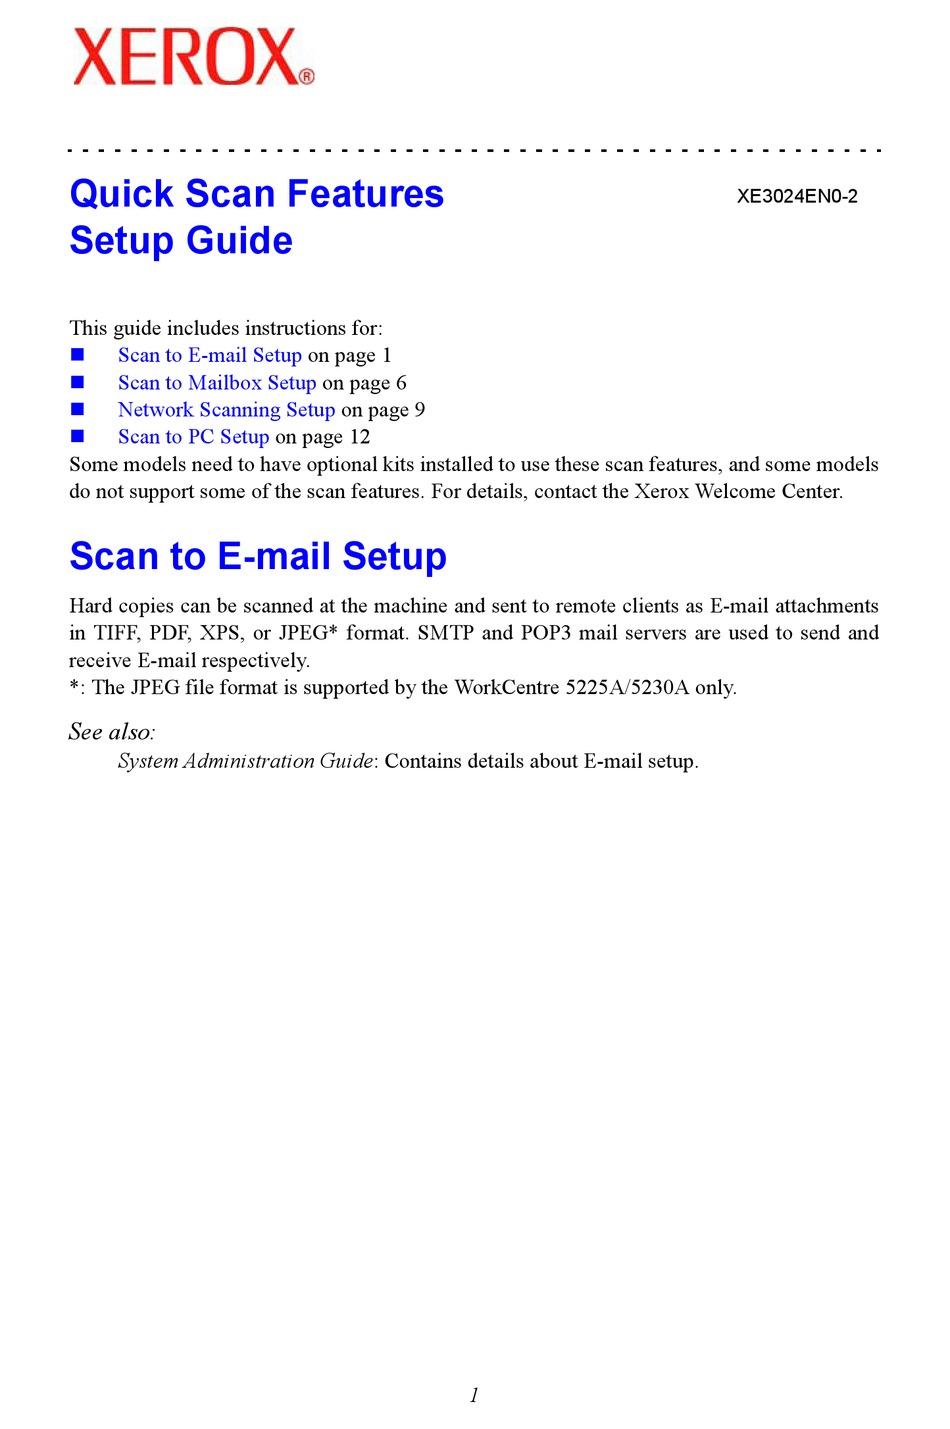 how to setup xerox scan to pc for workcentre 7500